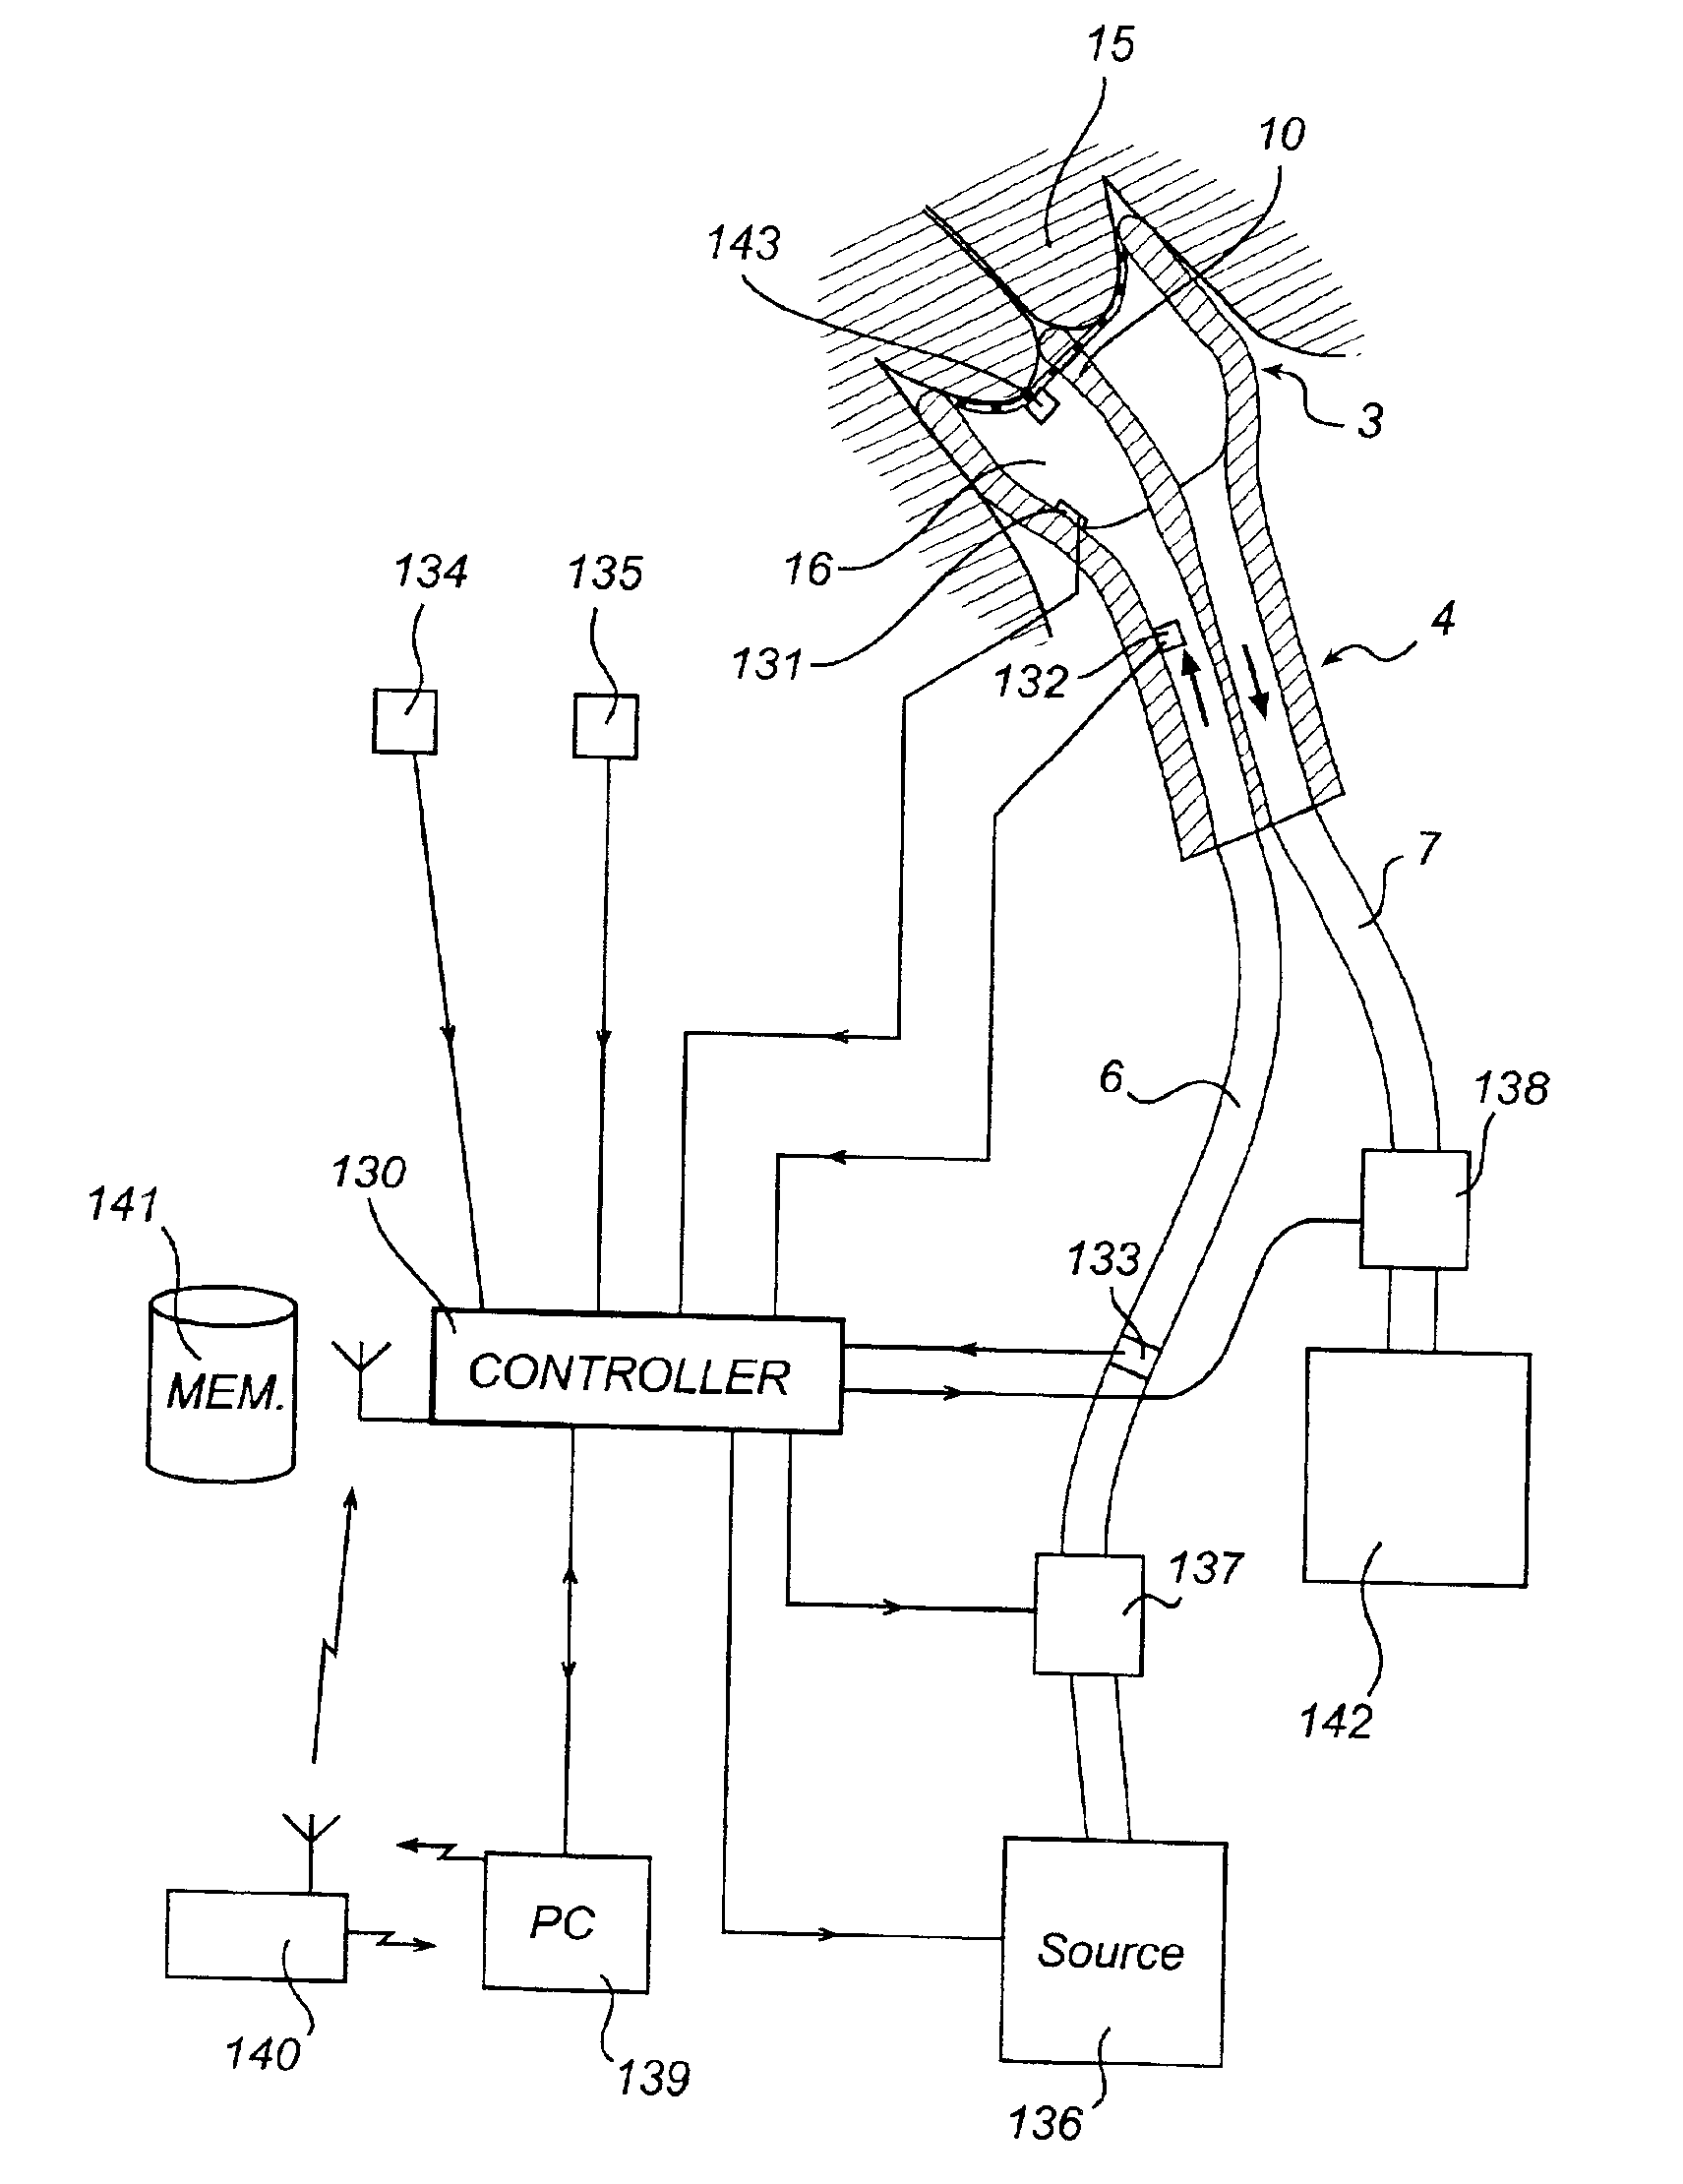 Method and device for treating inter alia the cervix